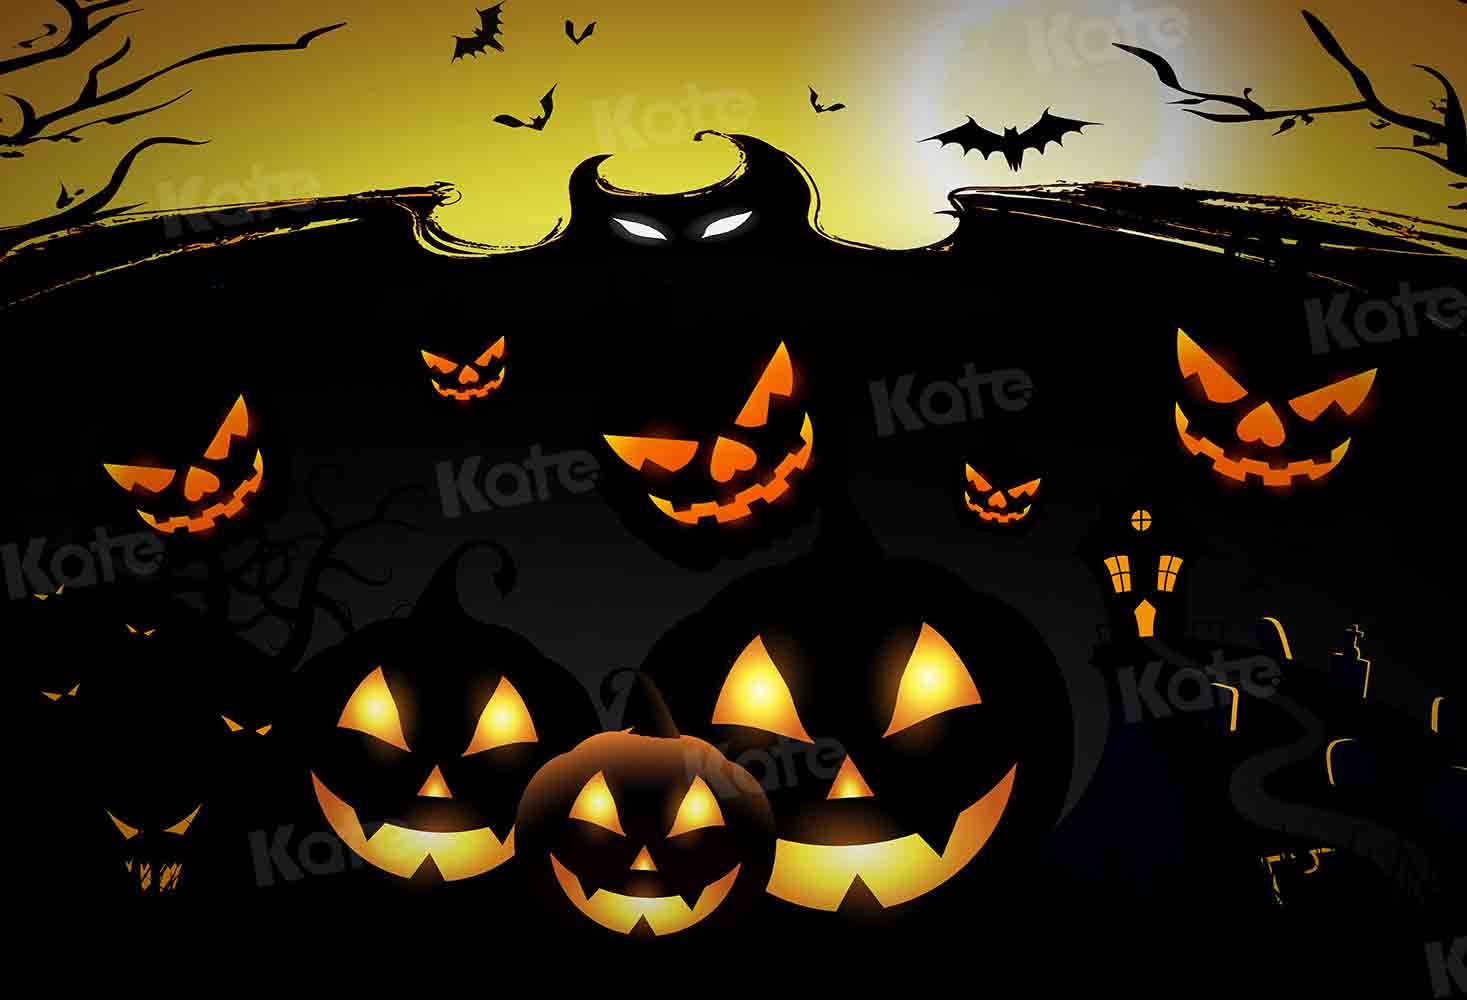 Kate Halloween Backdrop Pumpkin for Photography Designed by Chain Photography